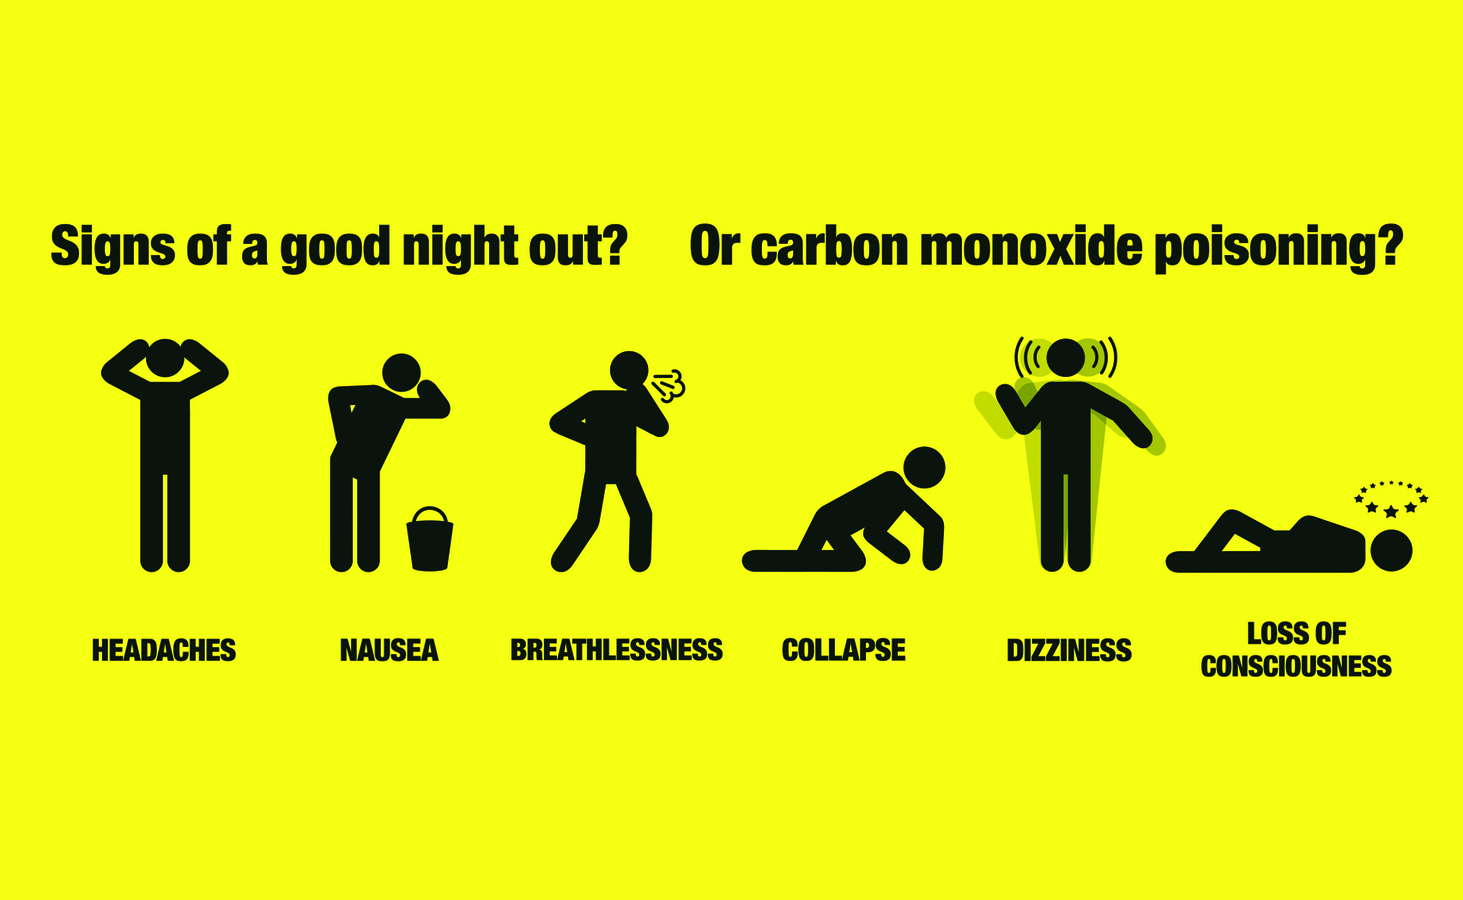 autopsy signs of carbon monoxide poisoning